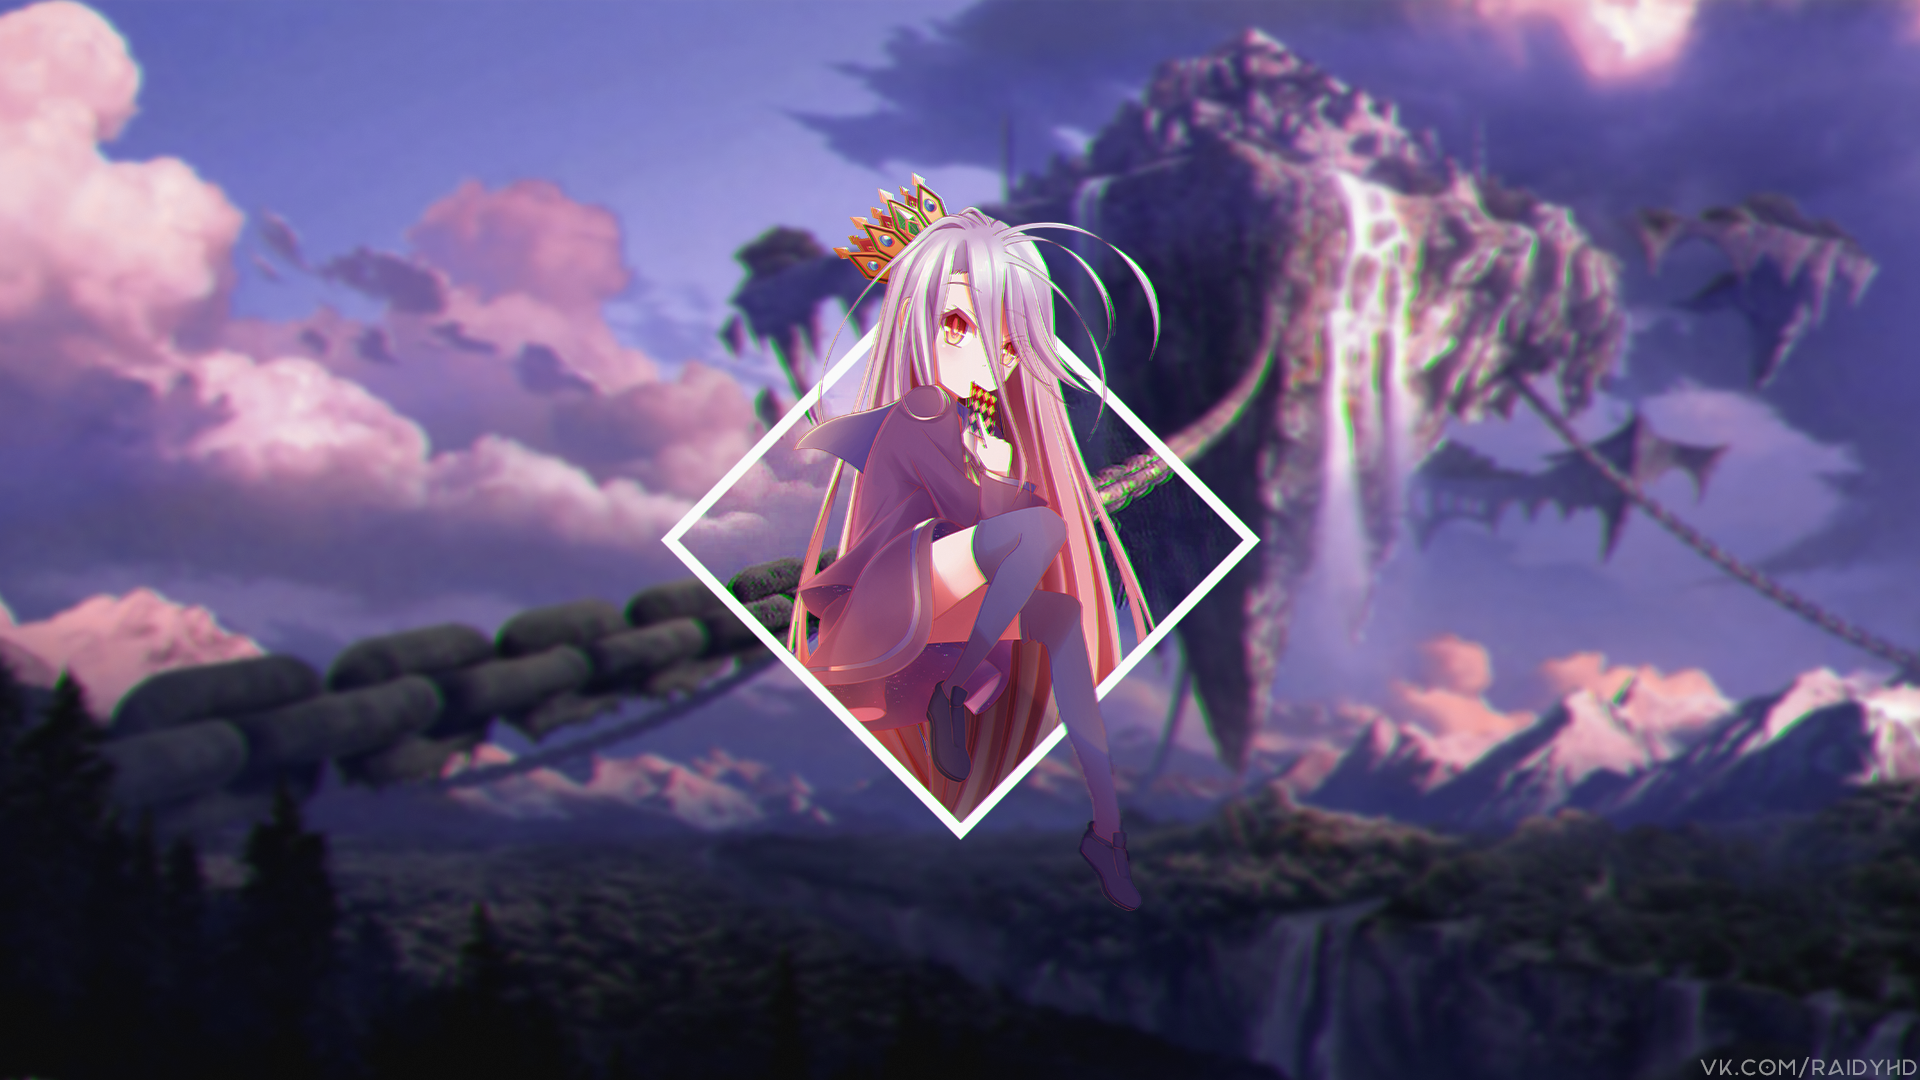 Anime 1920x1080 anime anime girls picture-in-picture No Game No Life watermarked